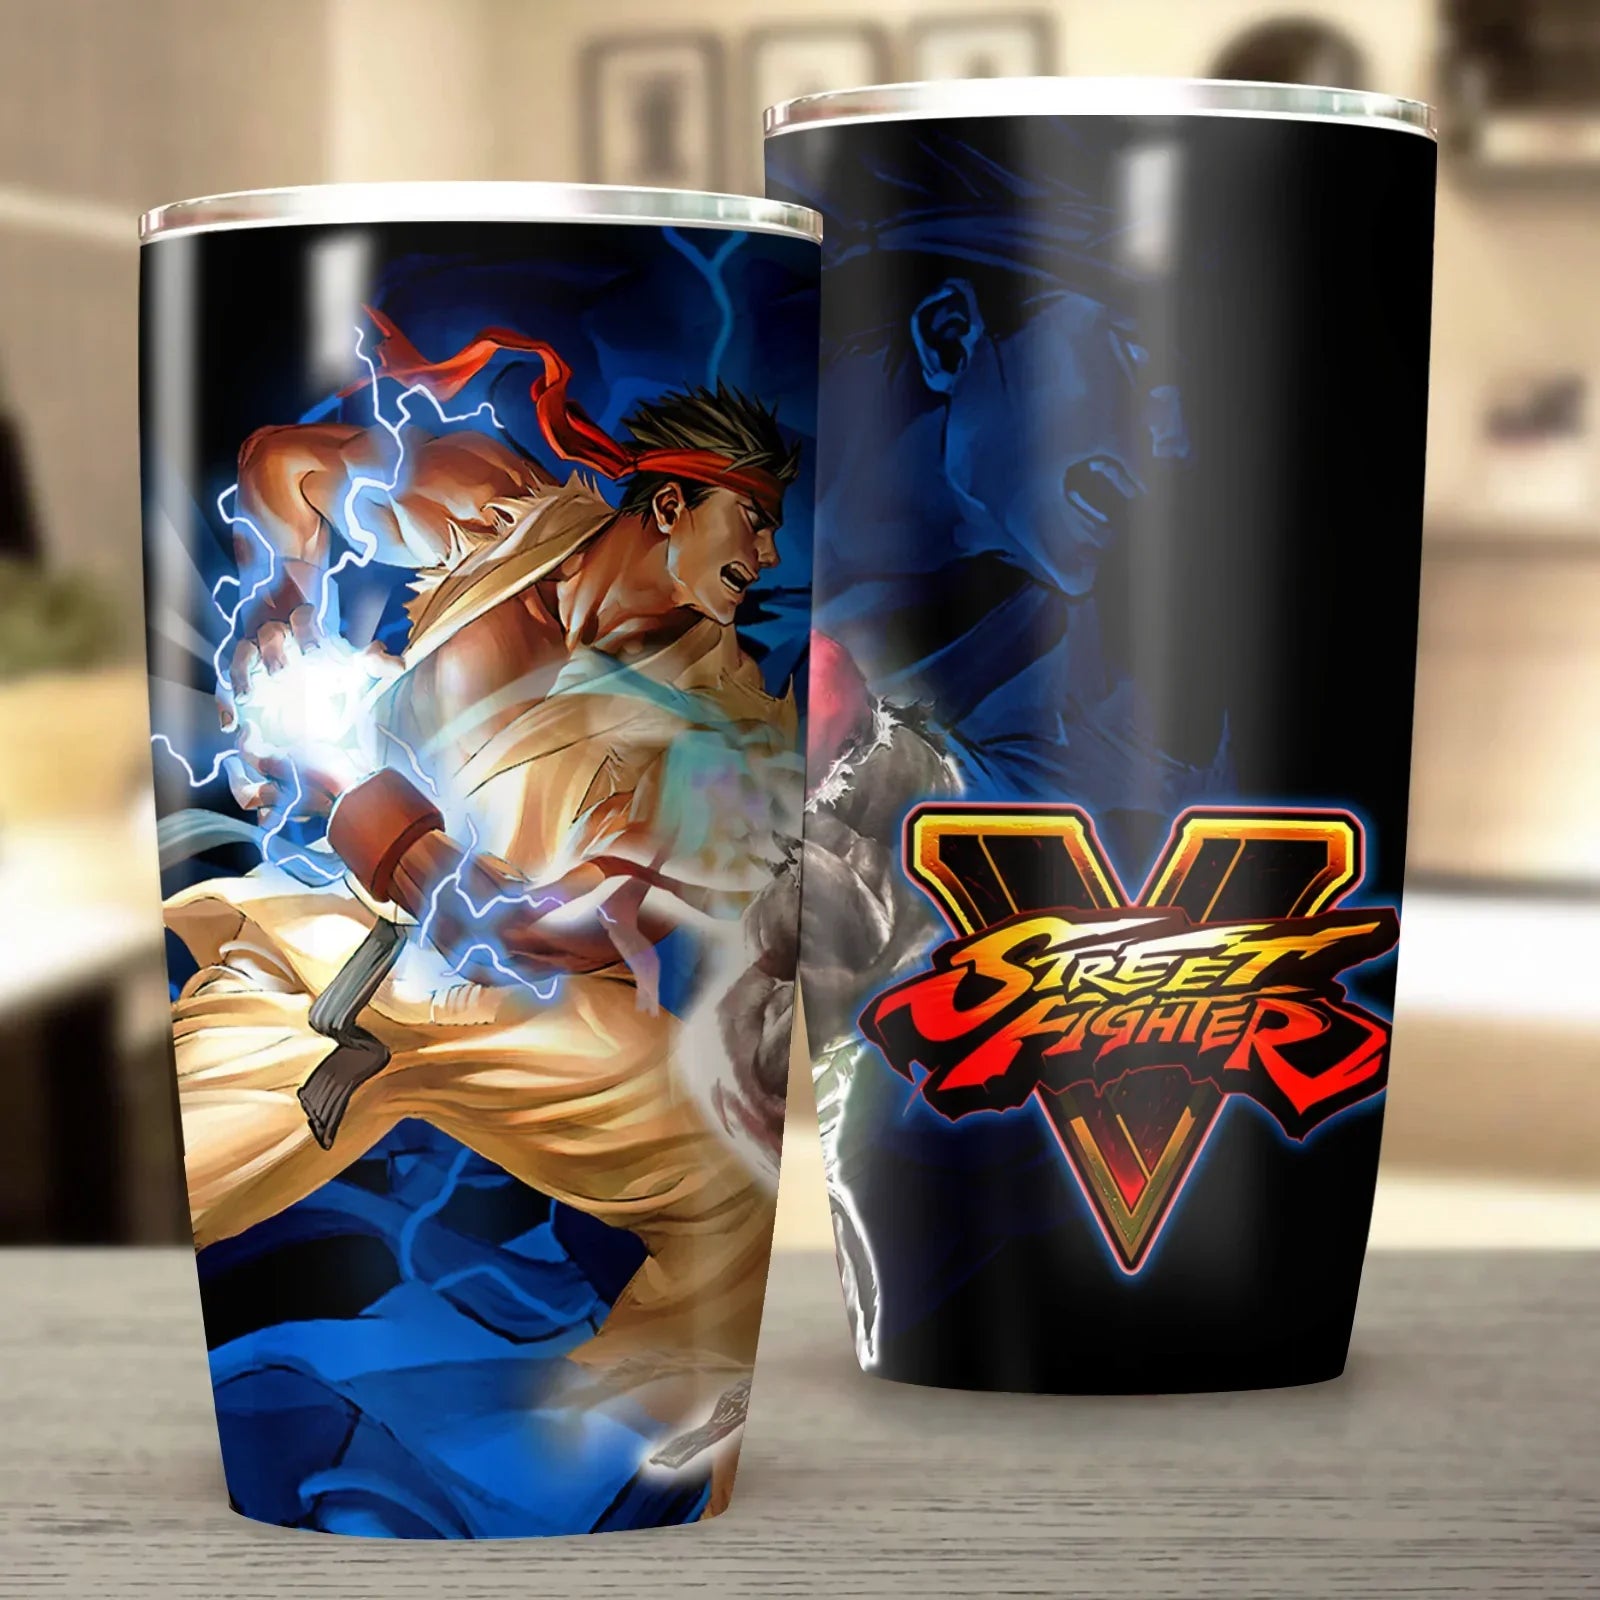 Street Fighter Video Game Insulated Stainless Steel Tumbler 20oz / 30oz